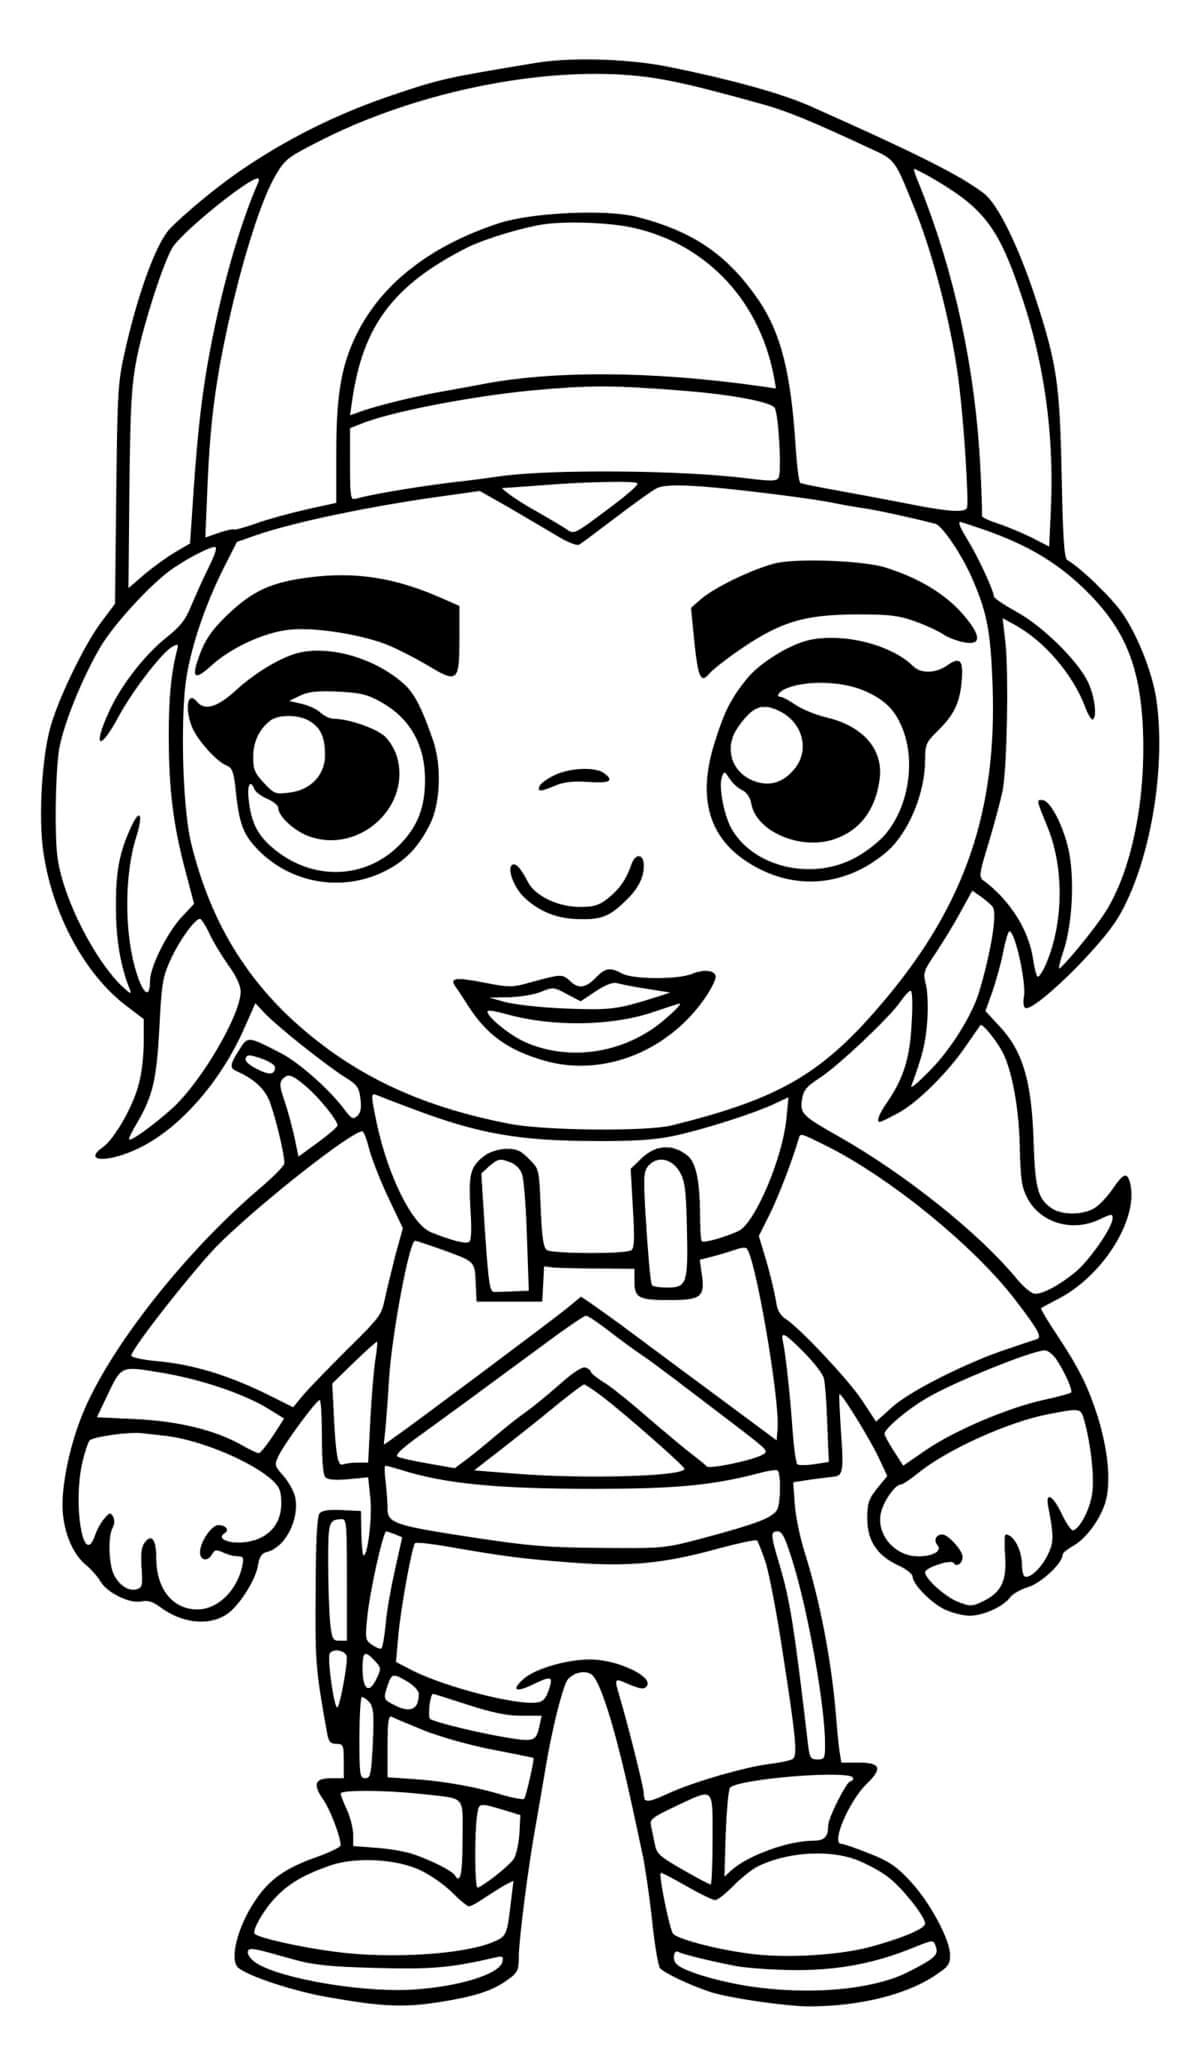 Loserfruit Fortnite Coloring Page